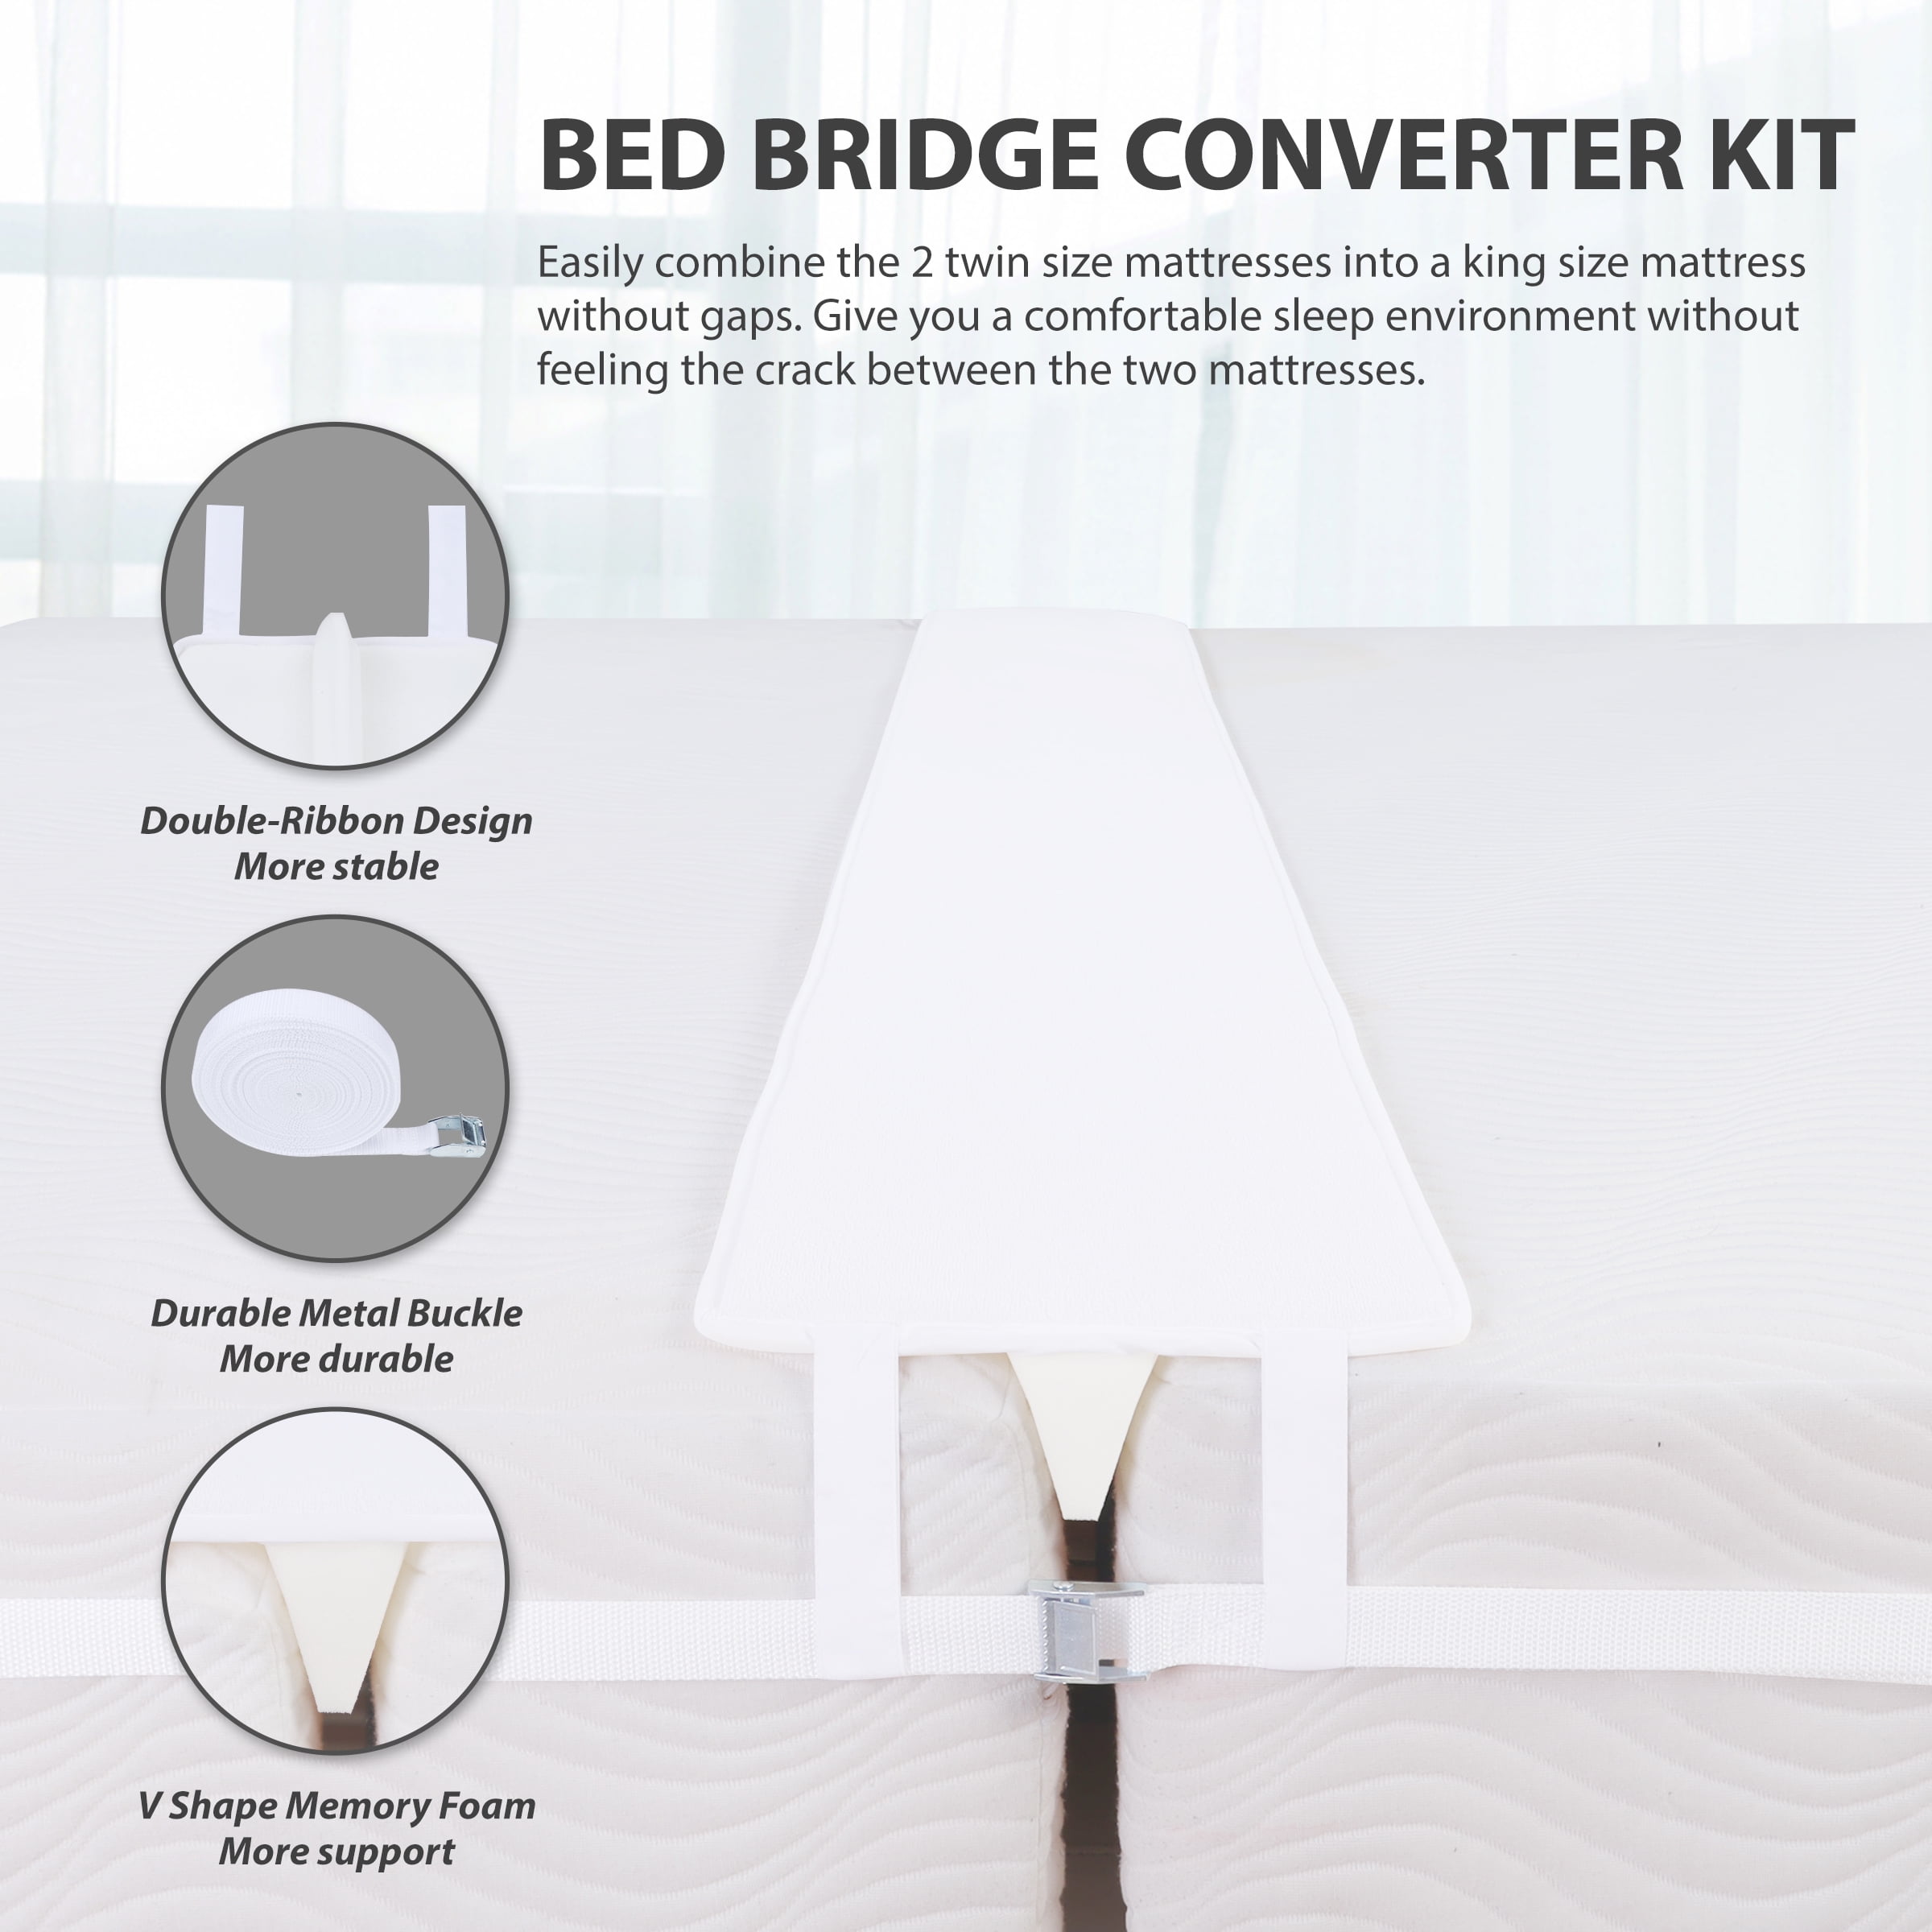 Vekkia Bed Bridge Twin to King Bed Converter Kit - 75in x 10in Split Twin  to King Gap Filler for Adjustable Bed, Mattress Bed Connector with Washable